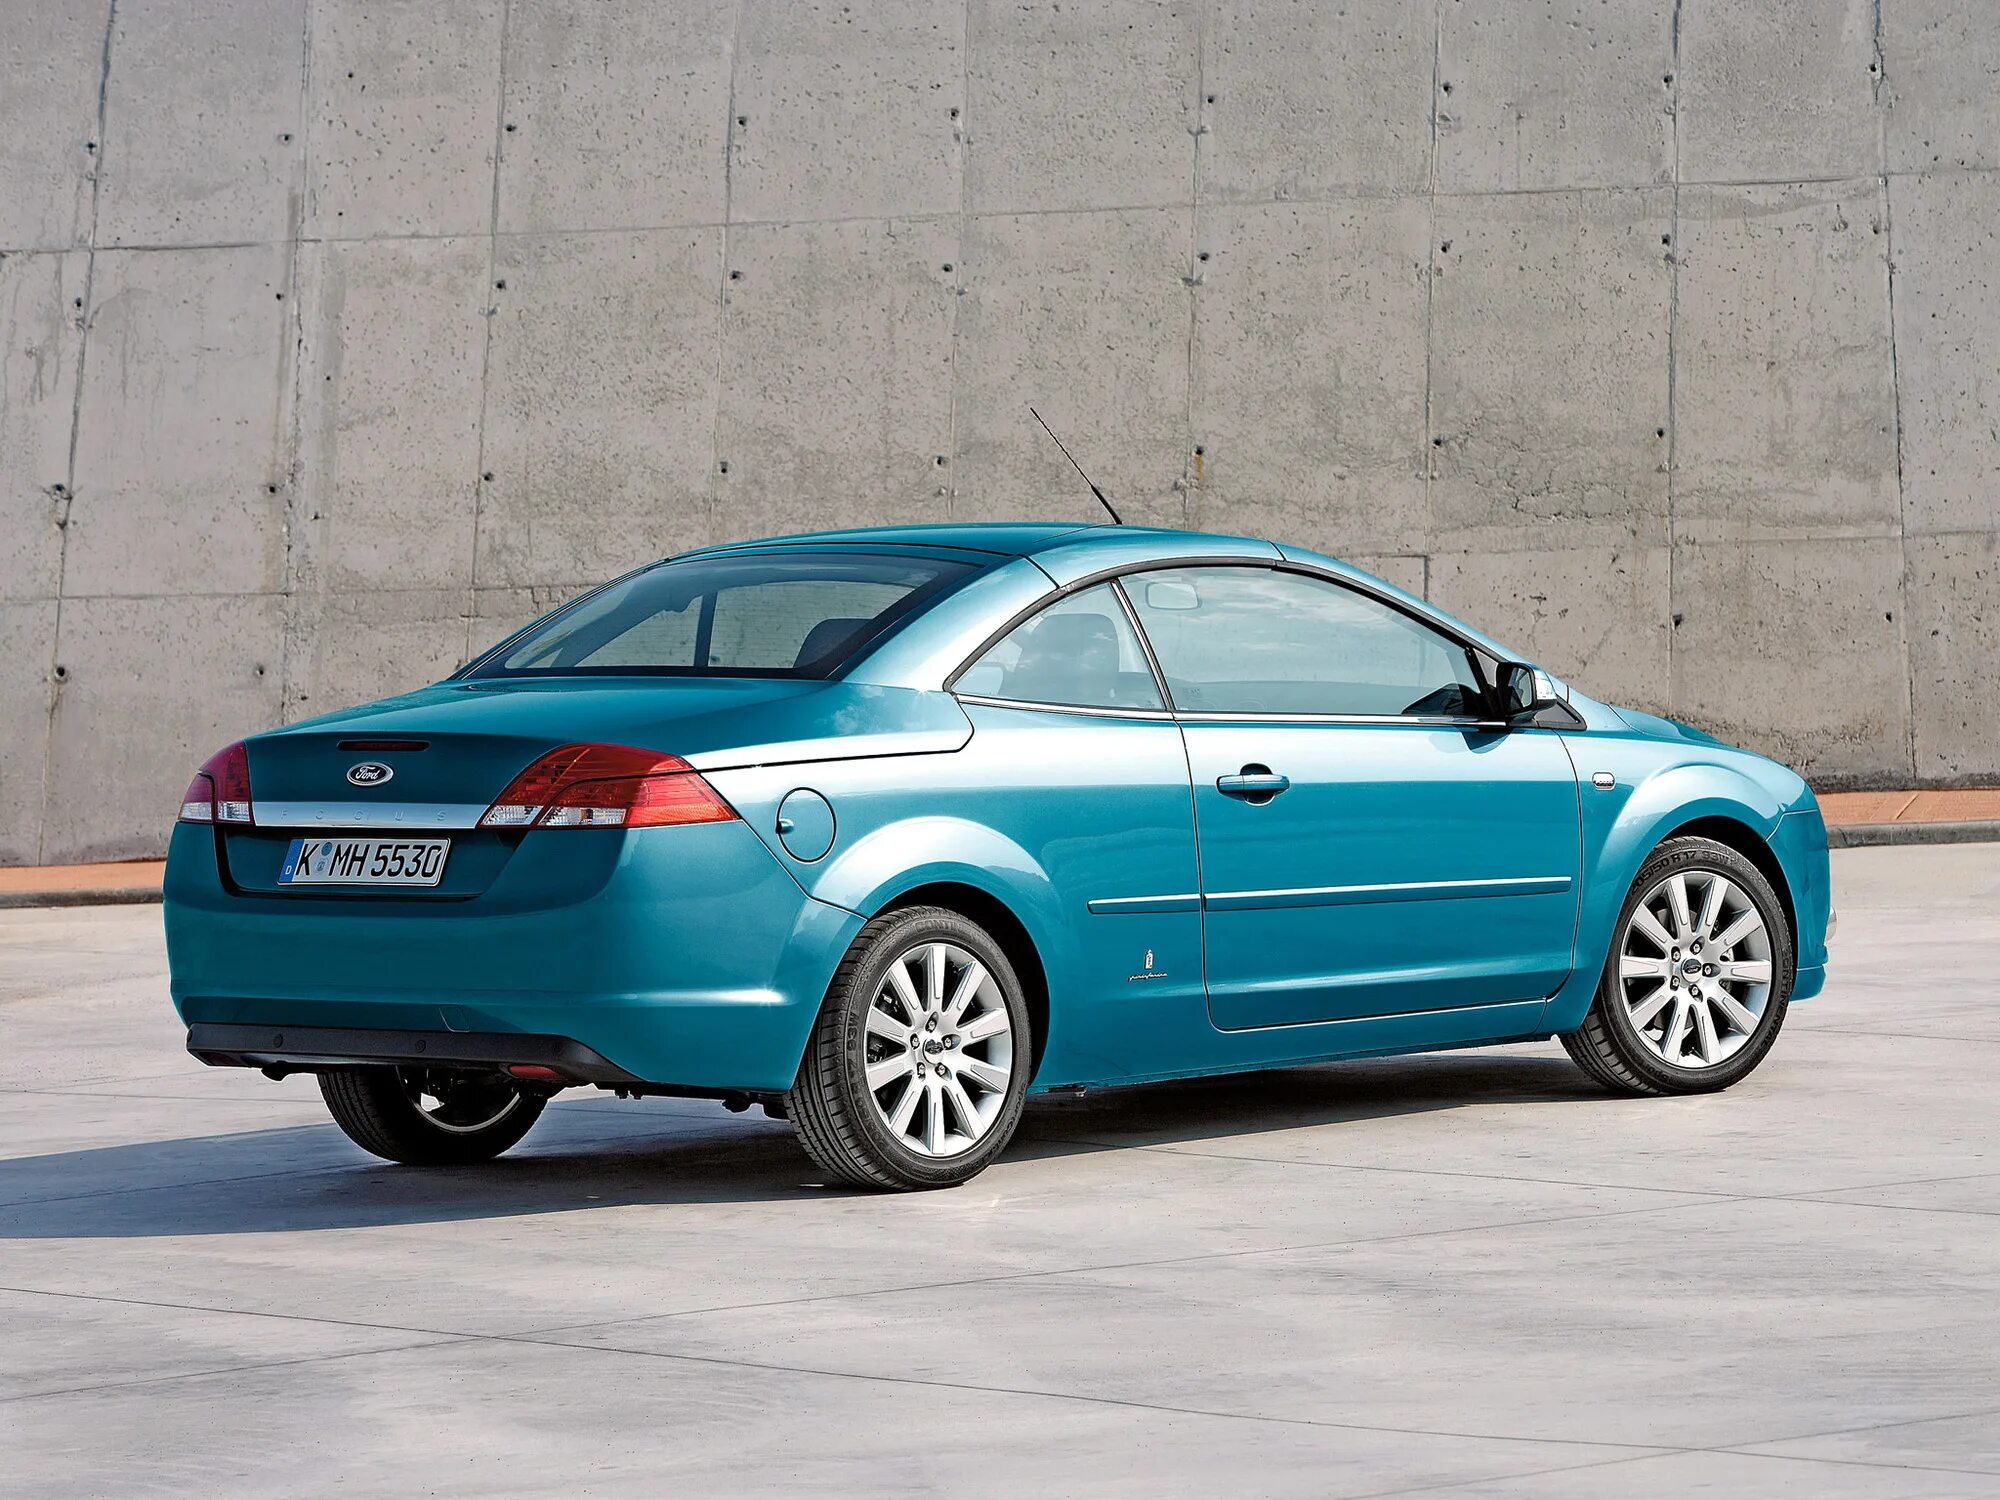 Ford Focus Coupe-Cabriolet. Ford Focus 2 Coupe. Форд фокус 2 купе. Форд фокус 2 кабриолет